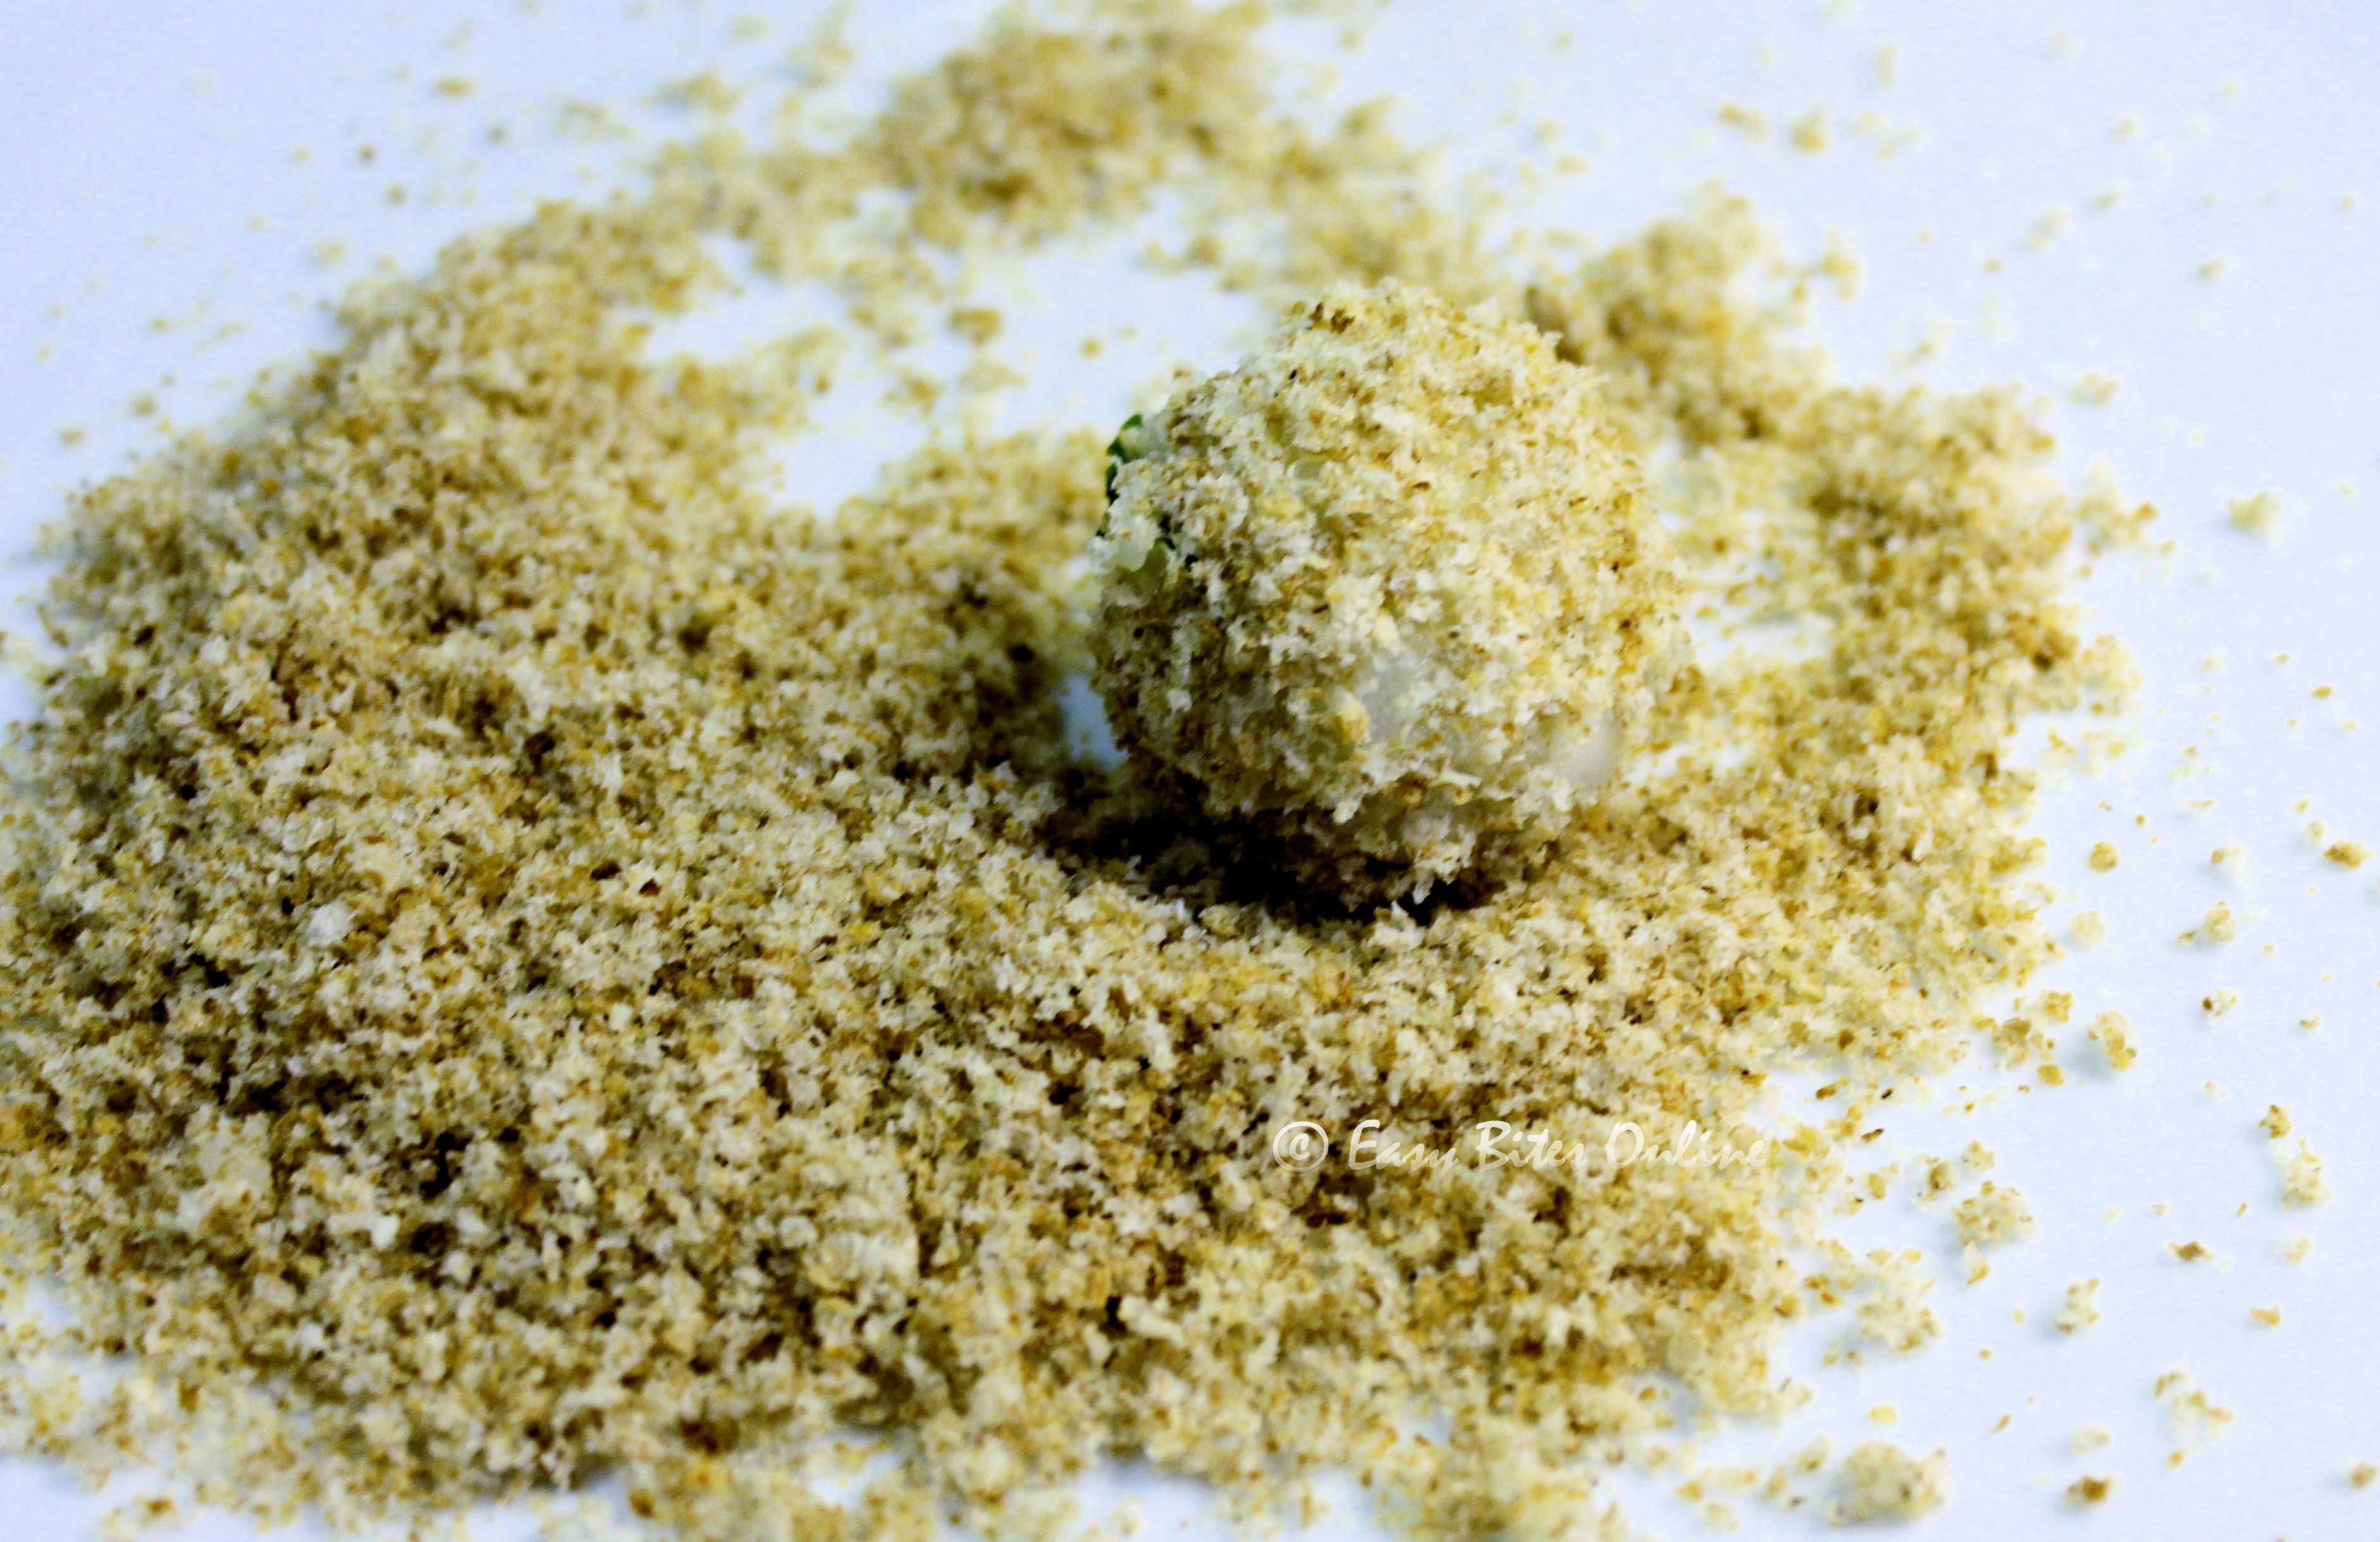 roll over bread crumbs to cover all over